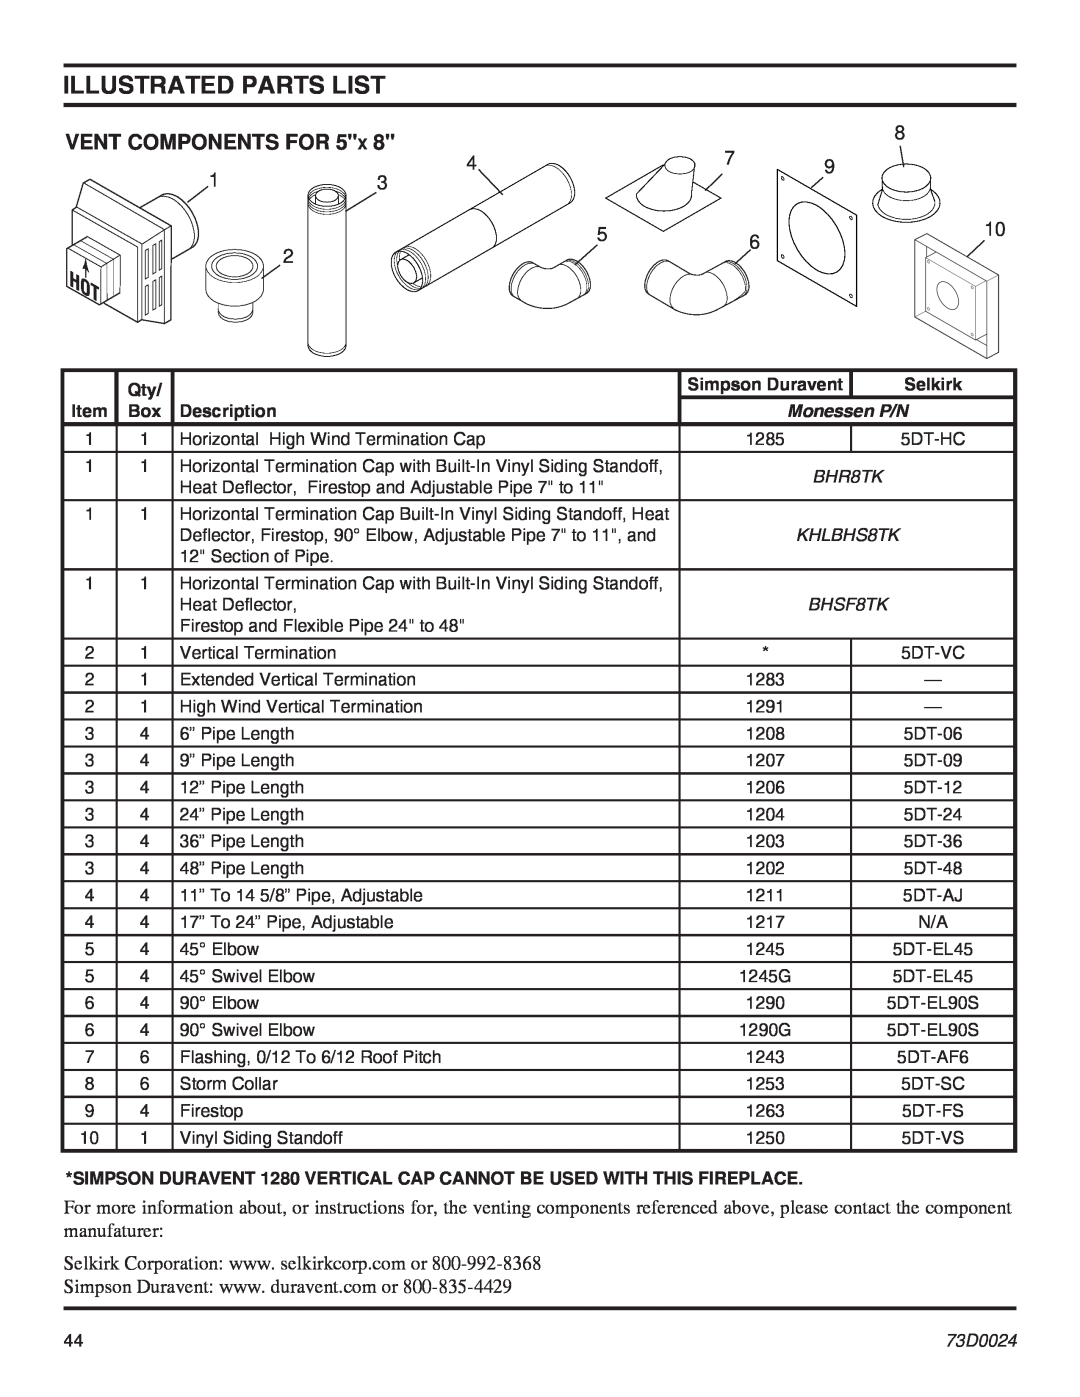 Monessen Hearth KHLDV SERIES manual Illustrated Parts List, Vent Components For 